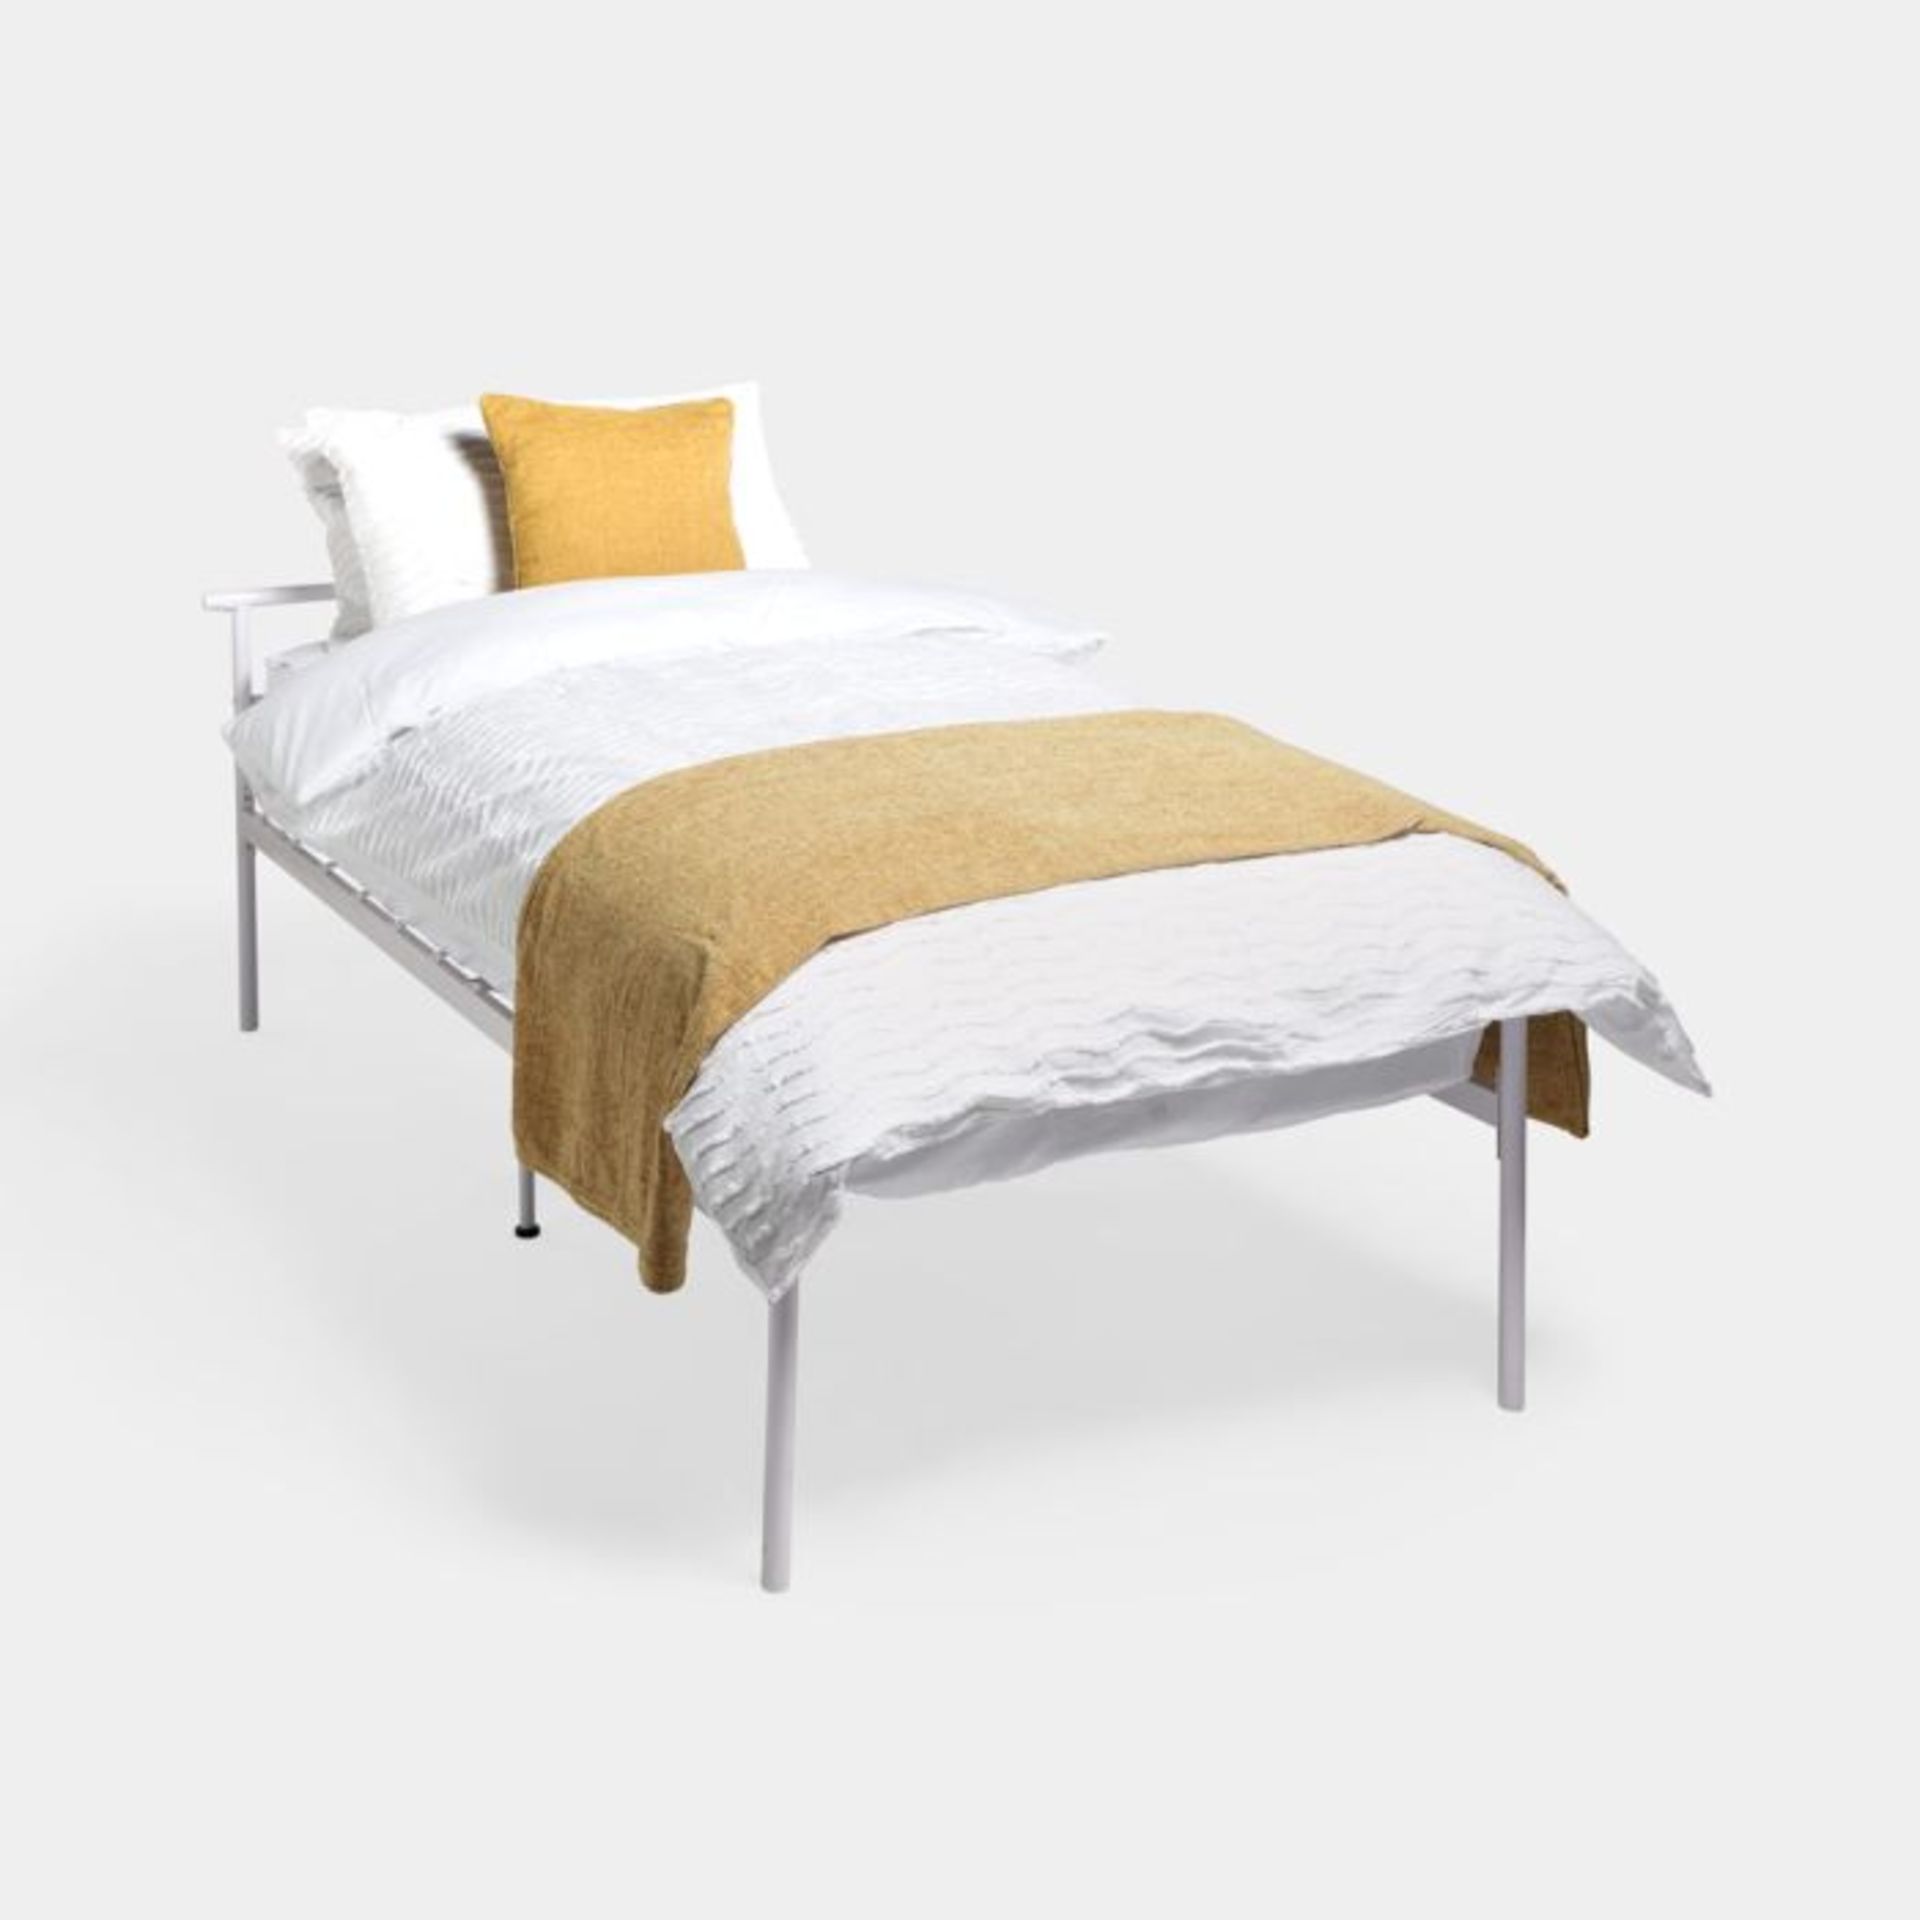 White Single Metal Bed Frame. -ER34. We spend a third of our lives asleep, so a perfect bed is a